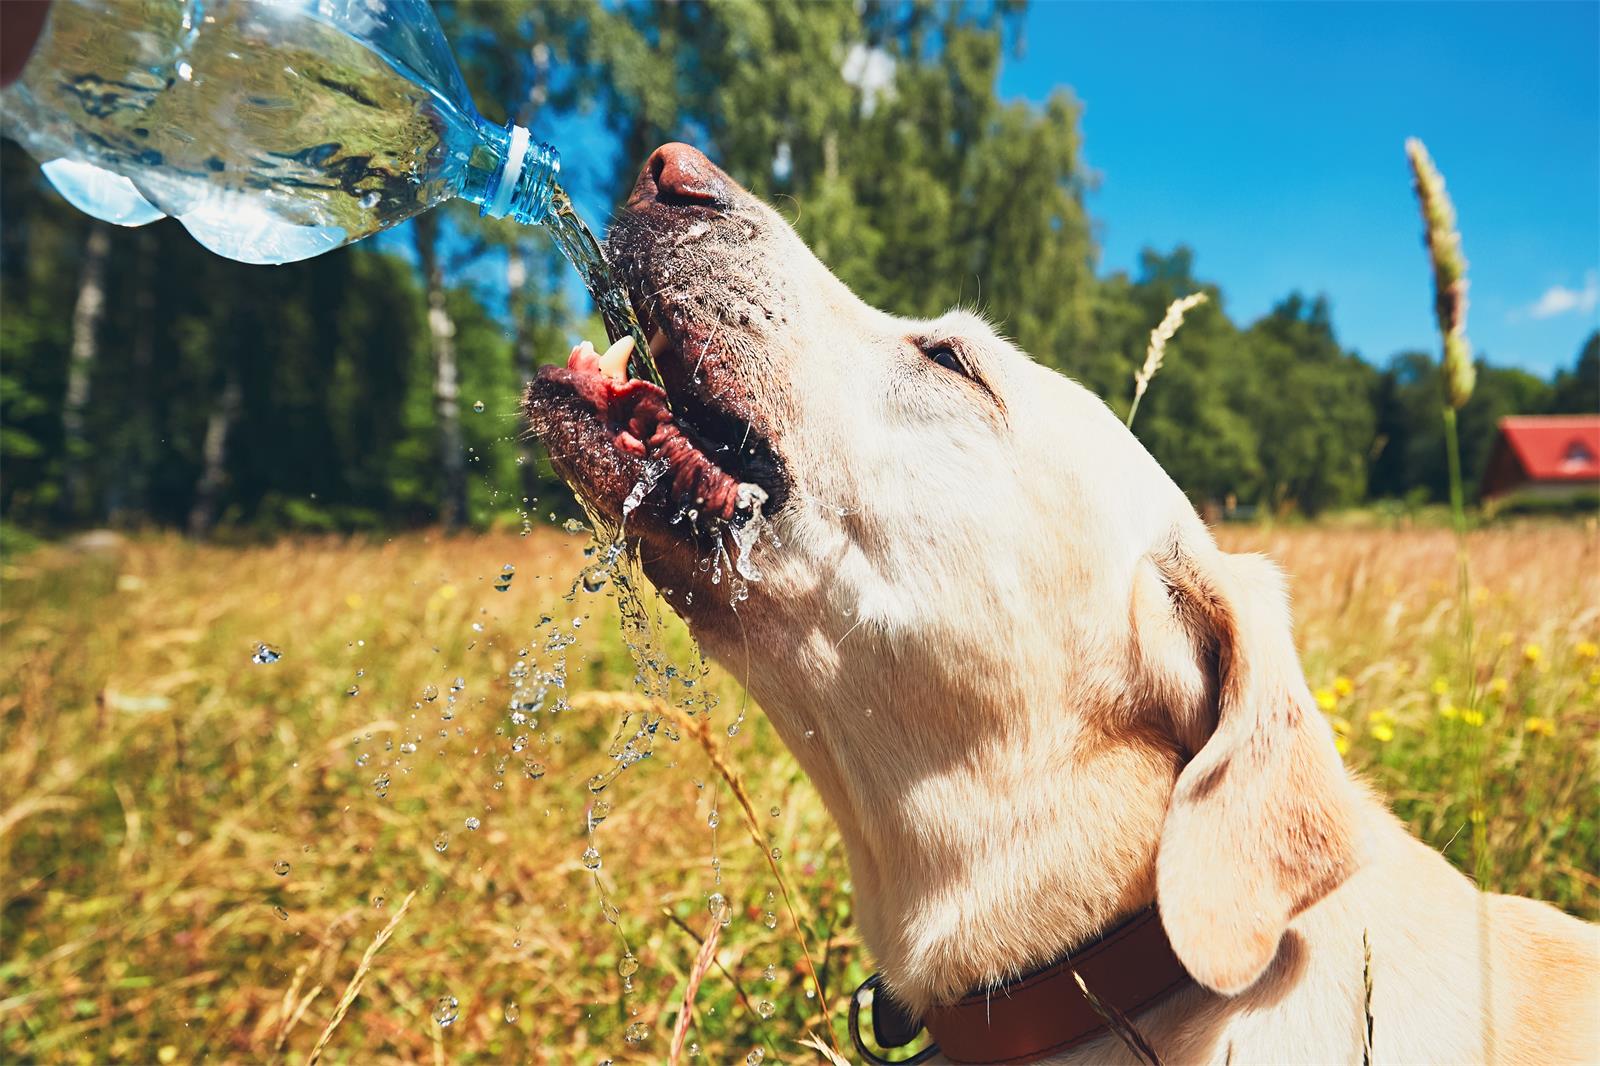 Should I Be Concerned If My Dog Drinks More Water Than Usual?